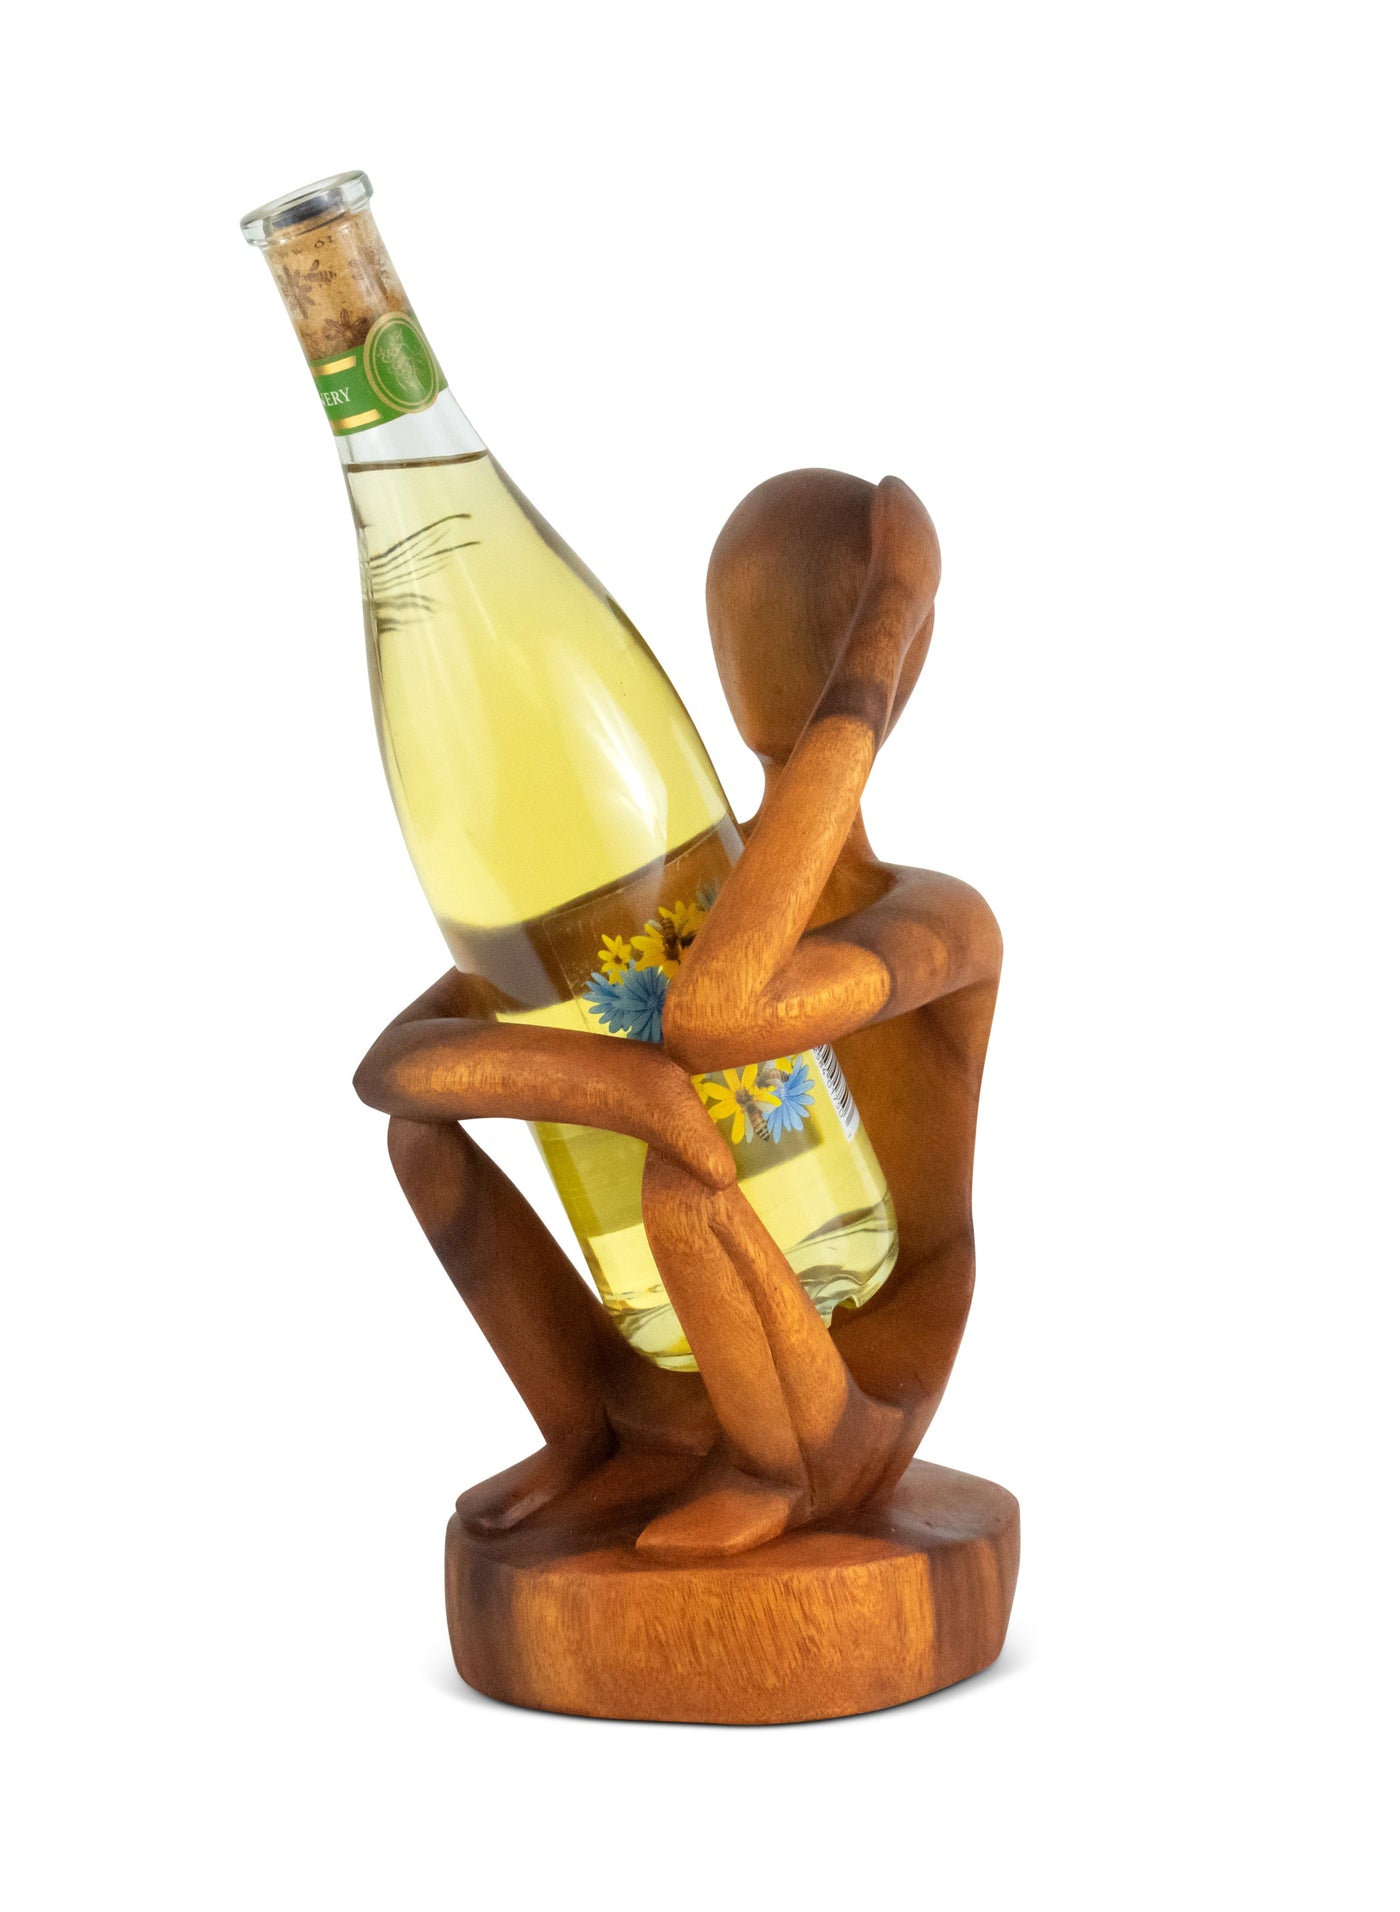 12" Wooden Abstract Hand Carved Wine Rack Bottle Holder "Thinking Man" Free Standing Thinker Handmade Wood Home Decor Accent Gift Bar Art Handcrafted